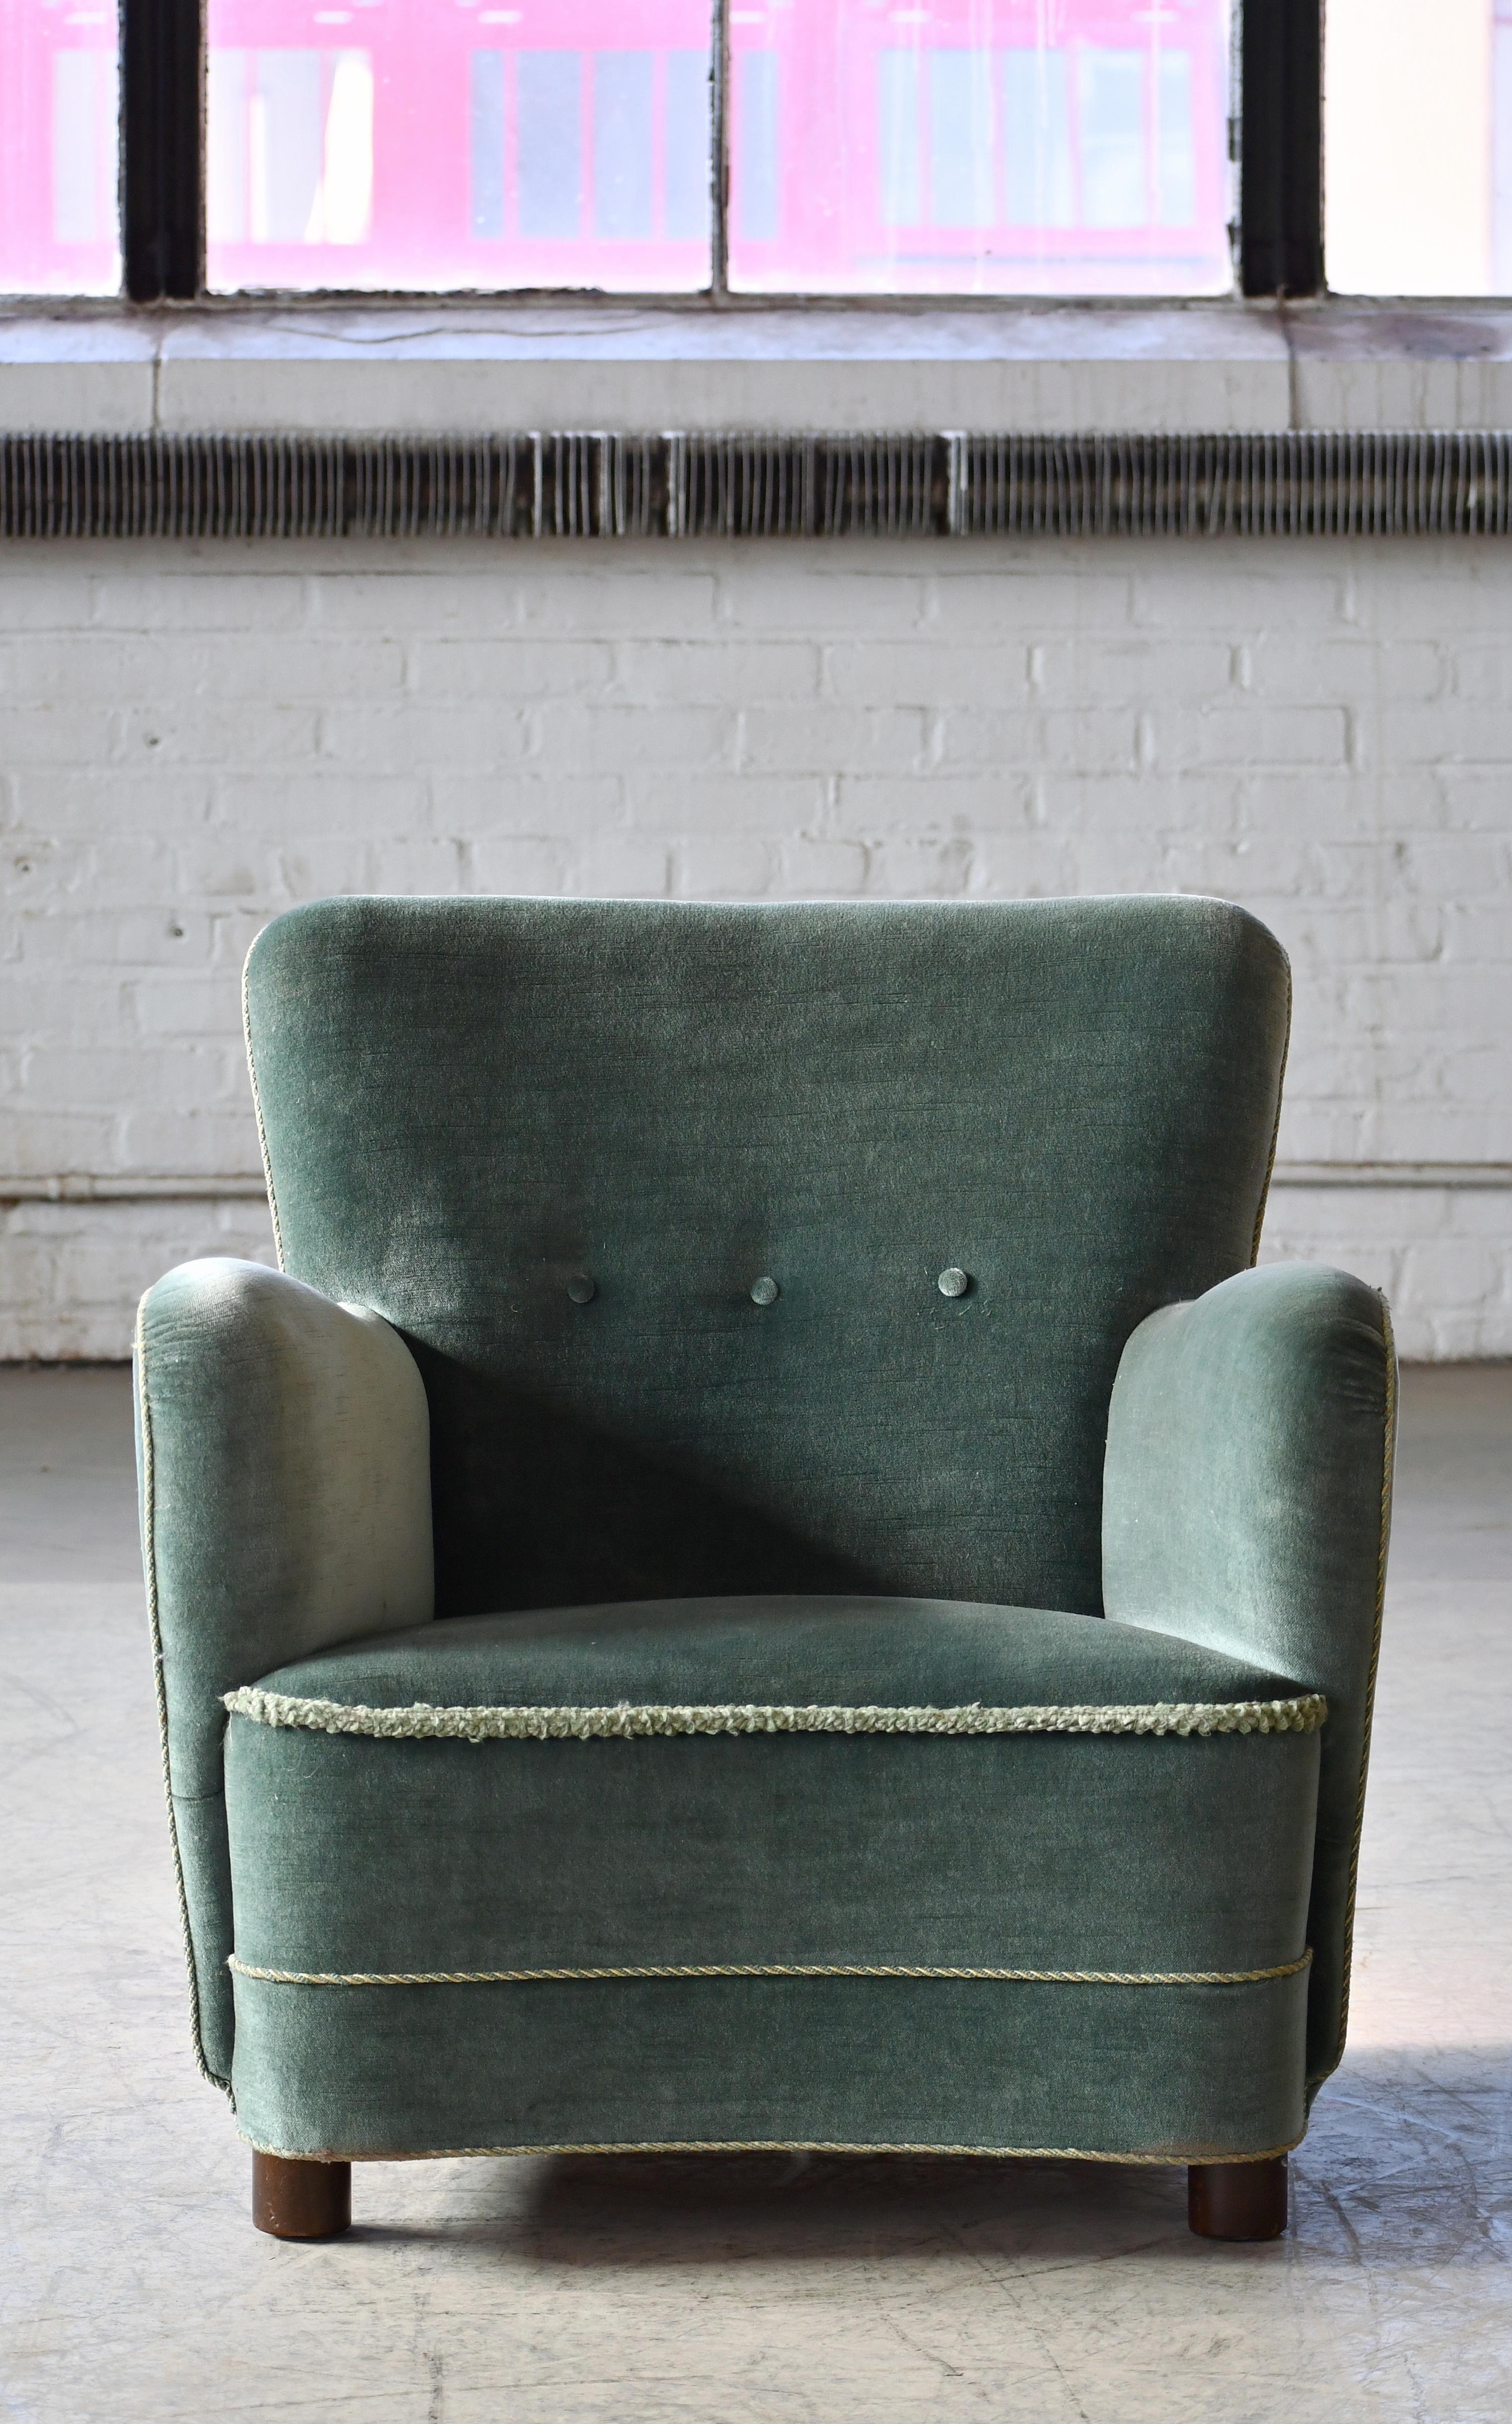 Curvy and eye-catching Danish club chair from the 1930s or 1940s. Set on mahogany feet the design is typical of the art 